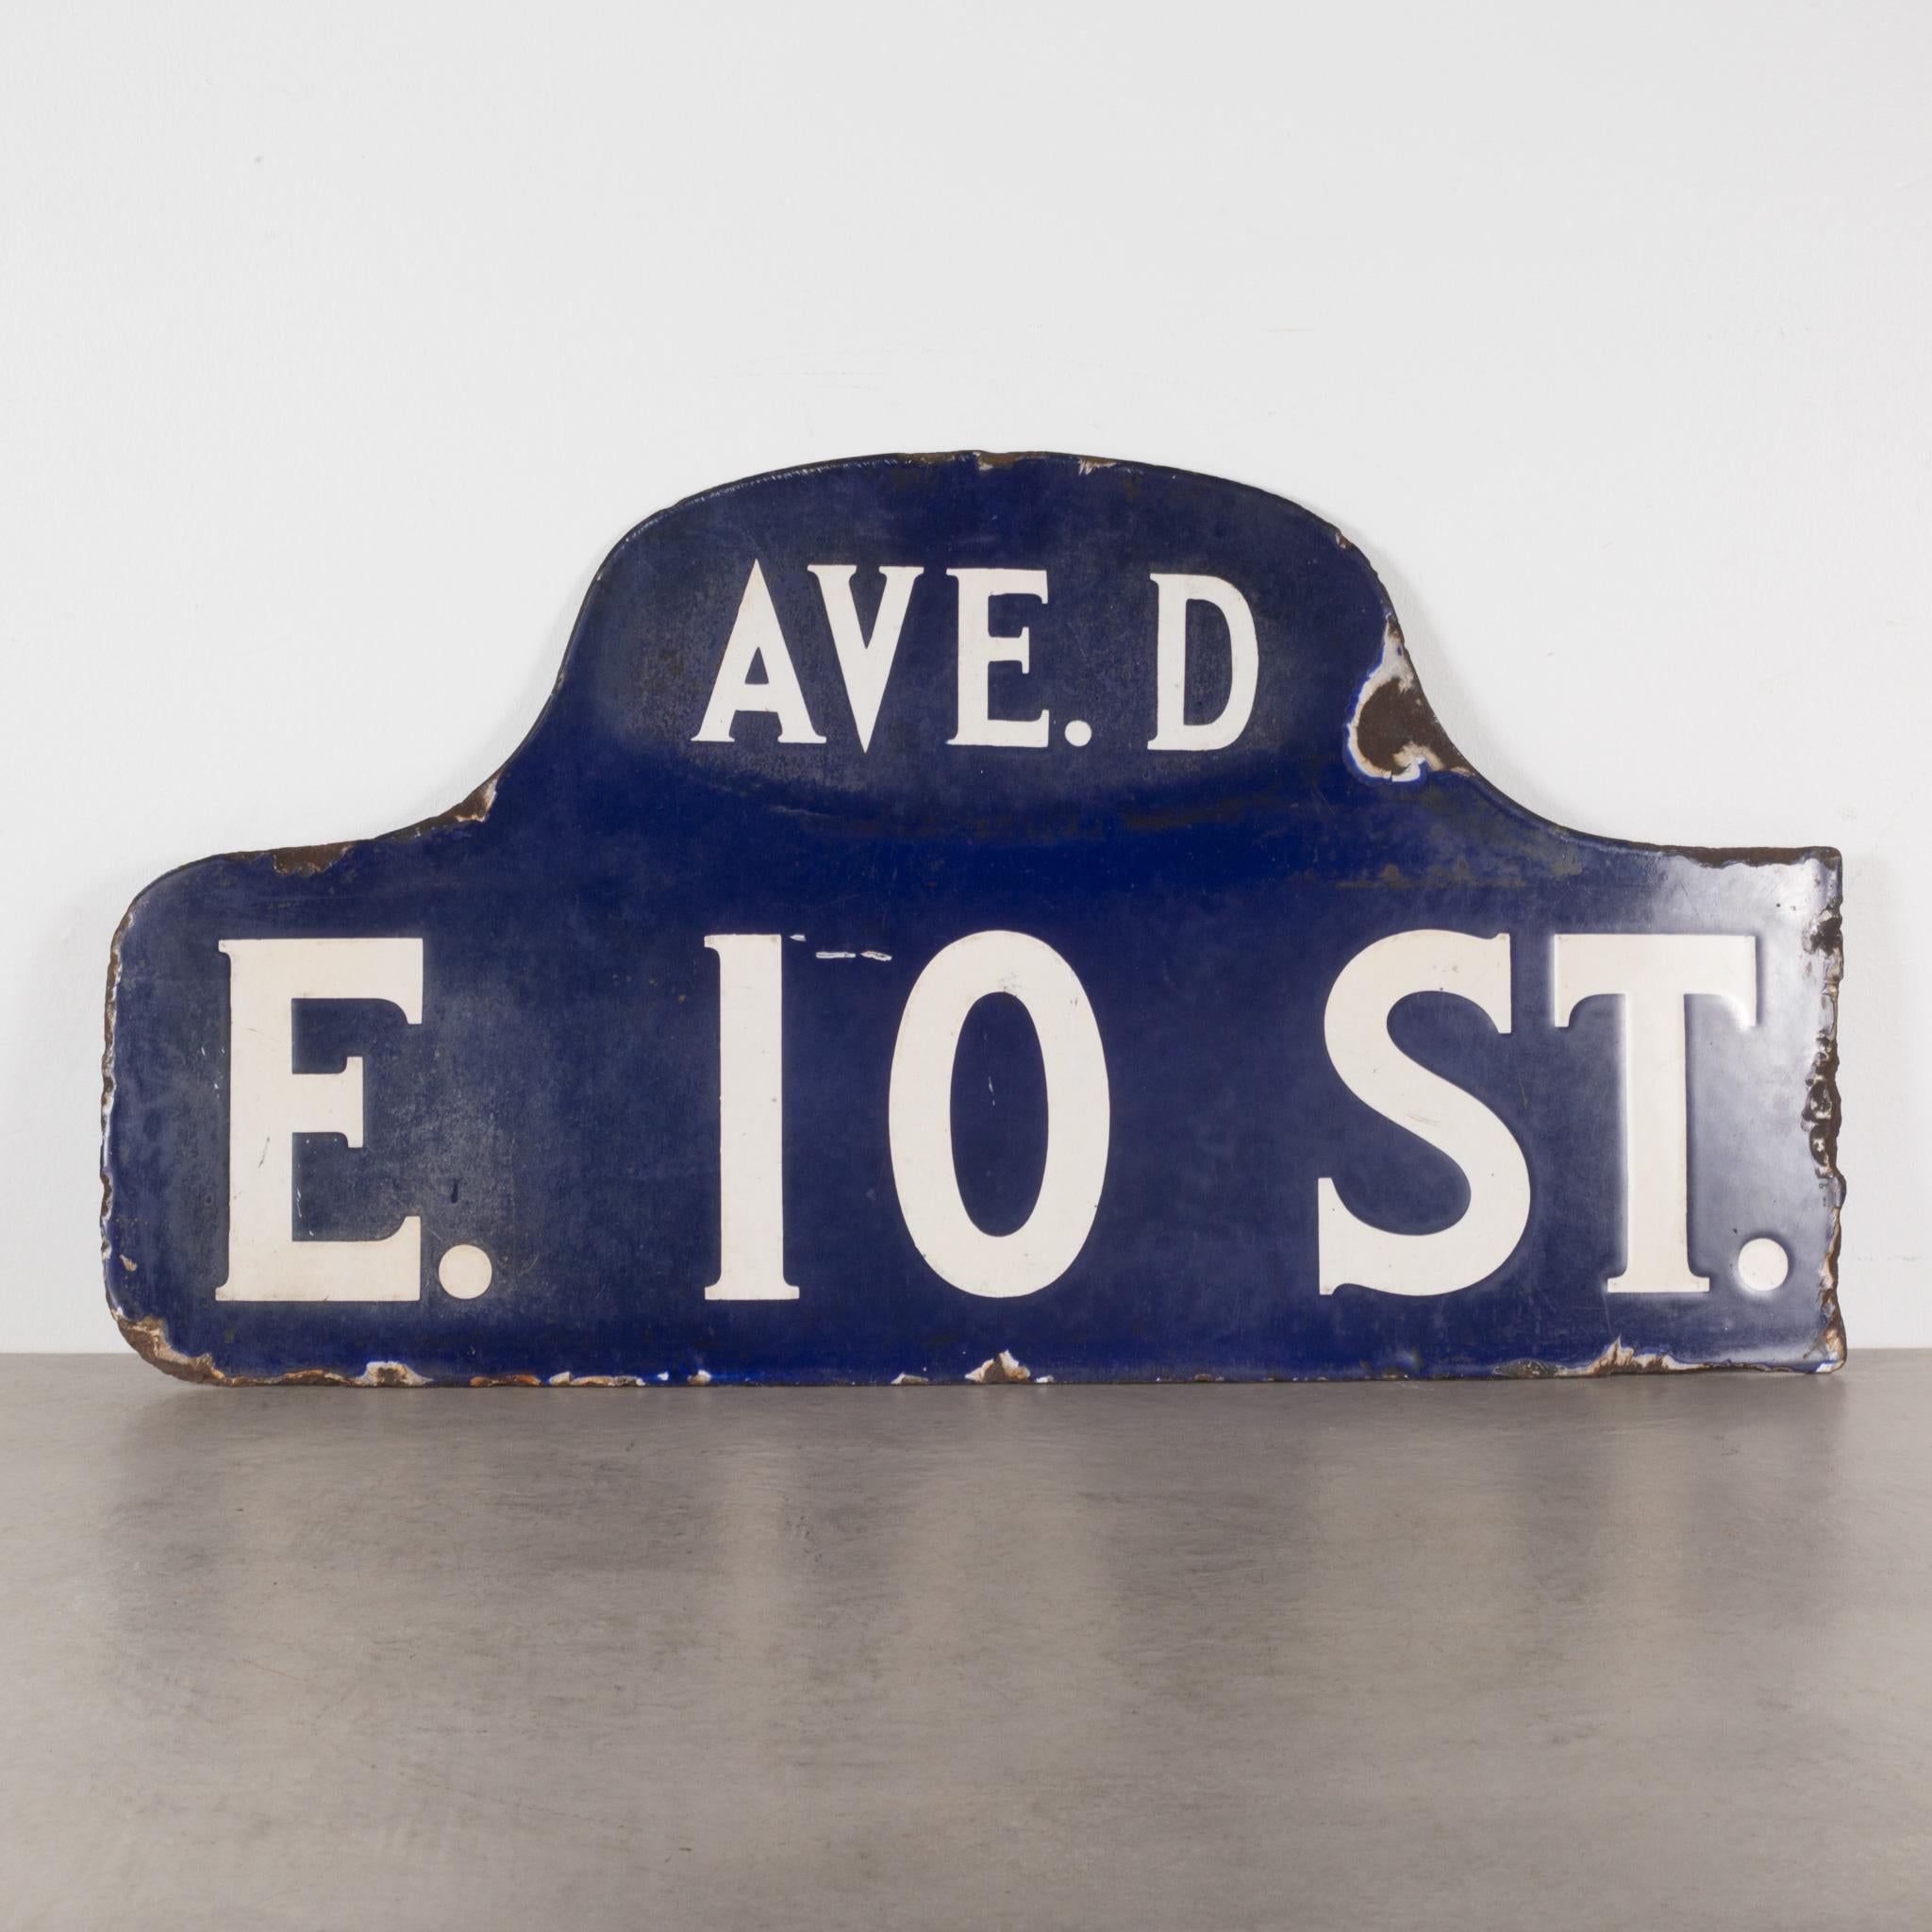 About

An original humpback porcelain NYC street sign from the East Village East 10th street and Avenue D.

Creator unknown.
Date of manufacture c.1910-1920.
Materials and techniques enameled porcelain.
Condition good. Wear consistent with